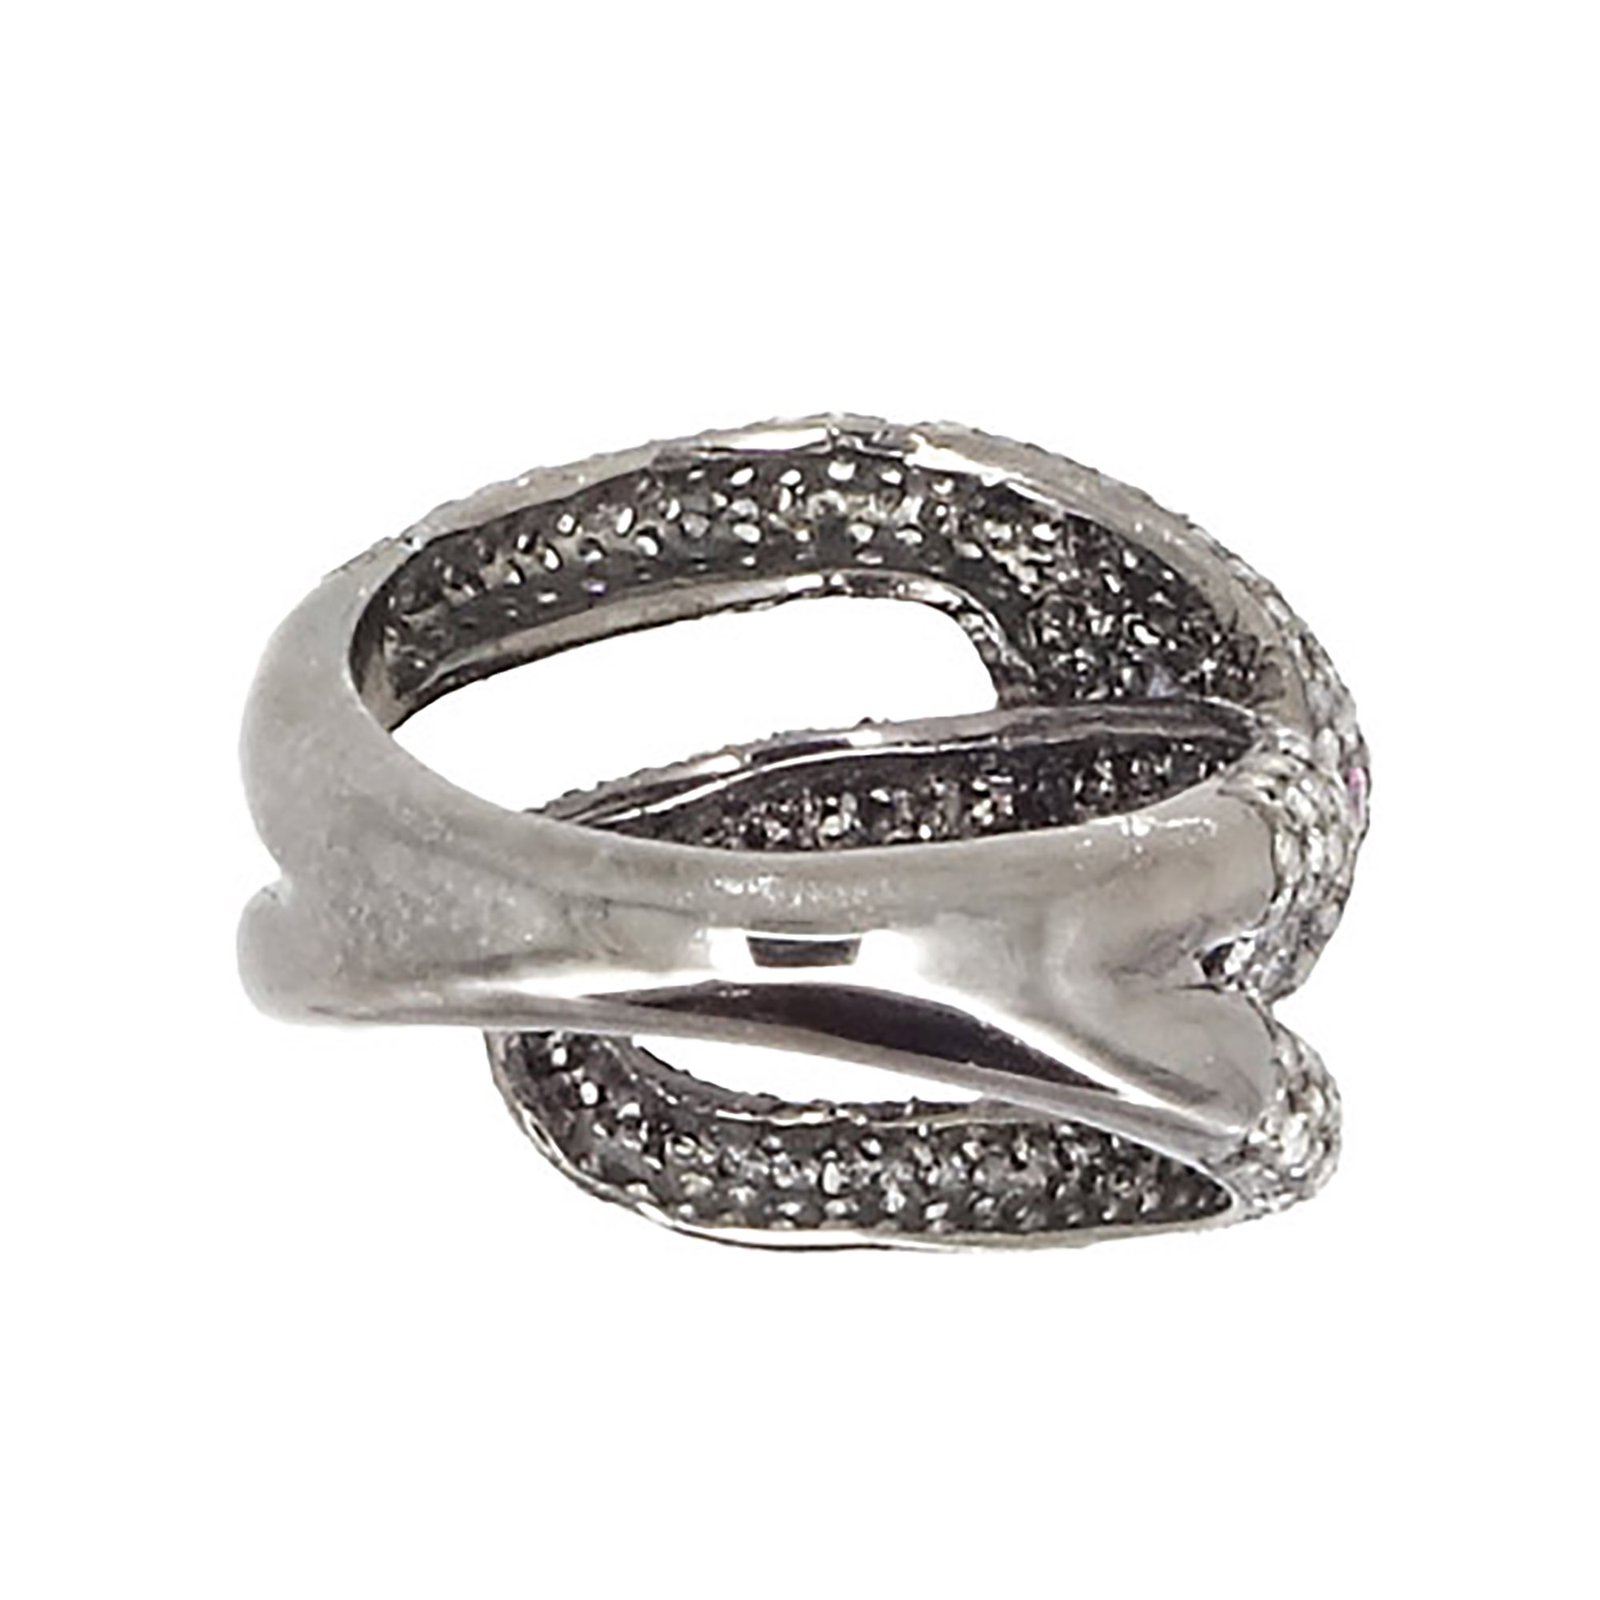 Solid silver pave diamond snake ring